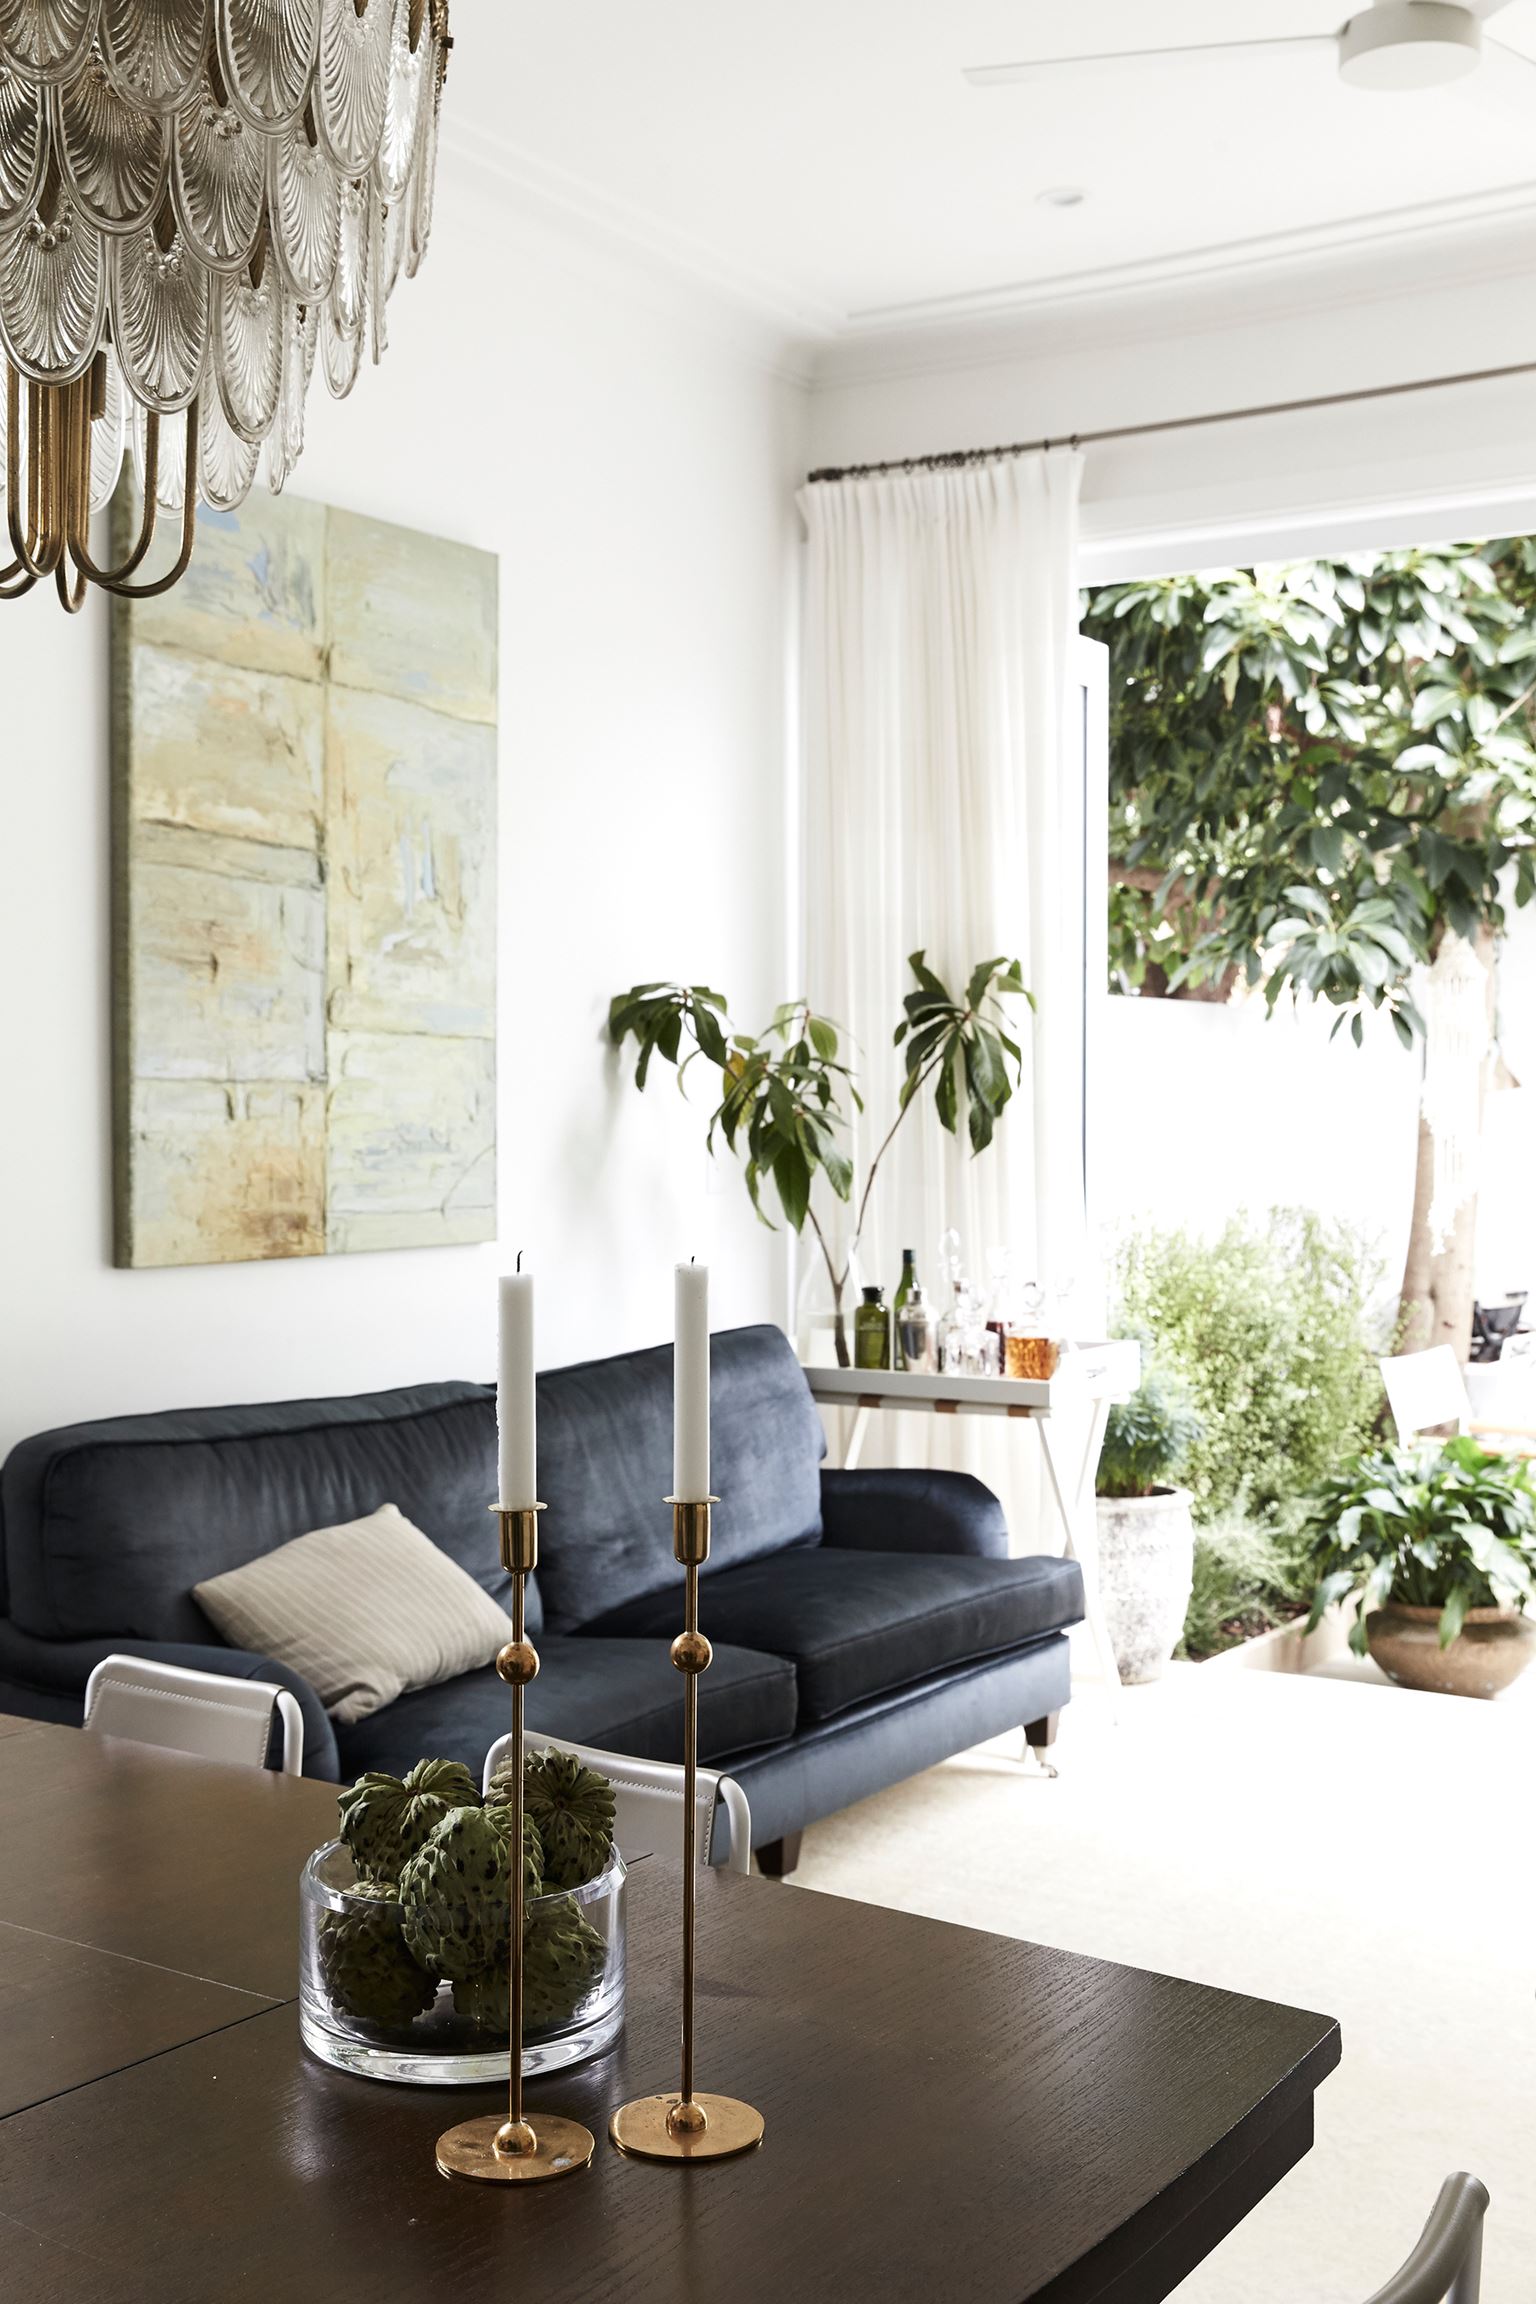 Tanya Levak's living room | Image: Sylvè Colless for Real Living